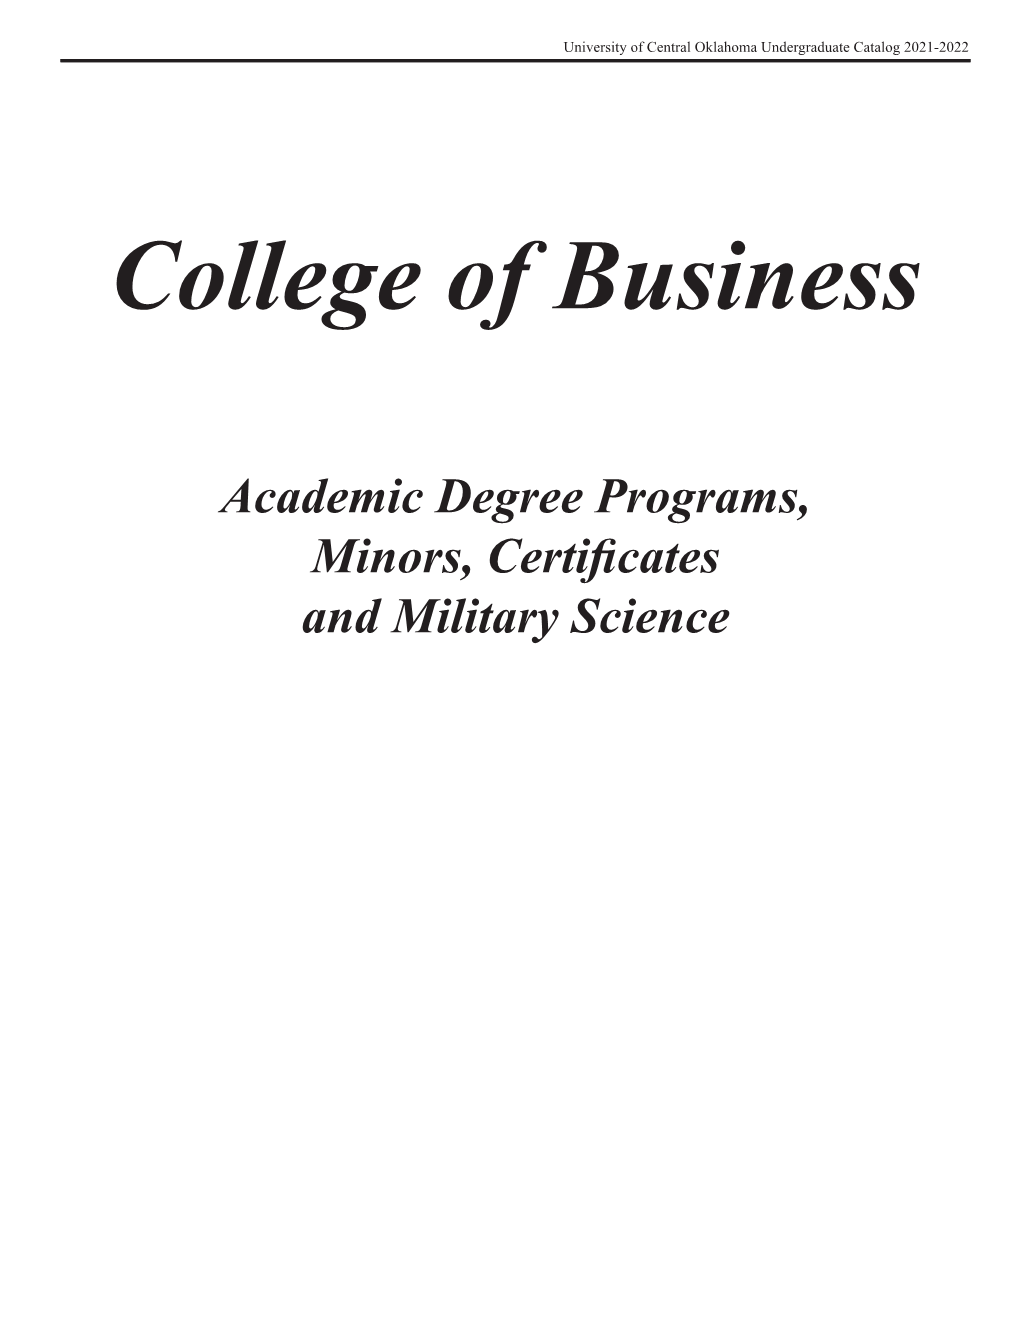 College of Business Academic Programs, Minors, Certificates, And